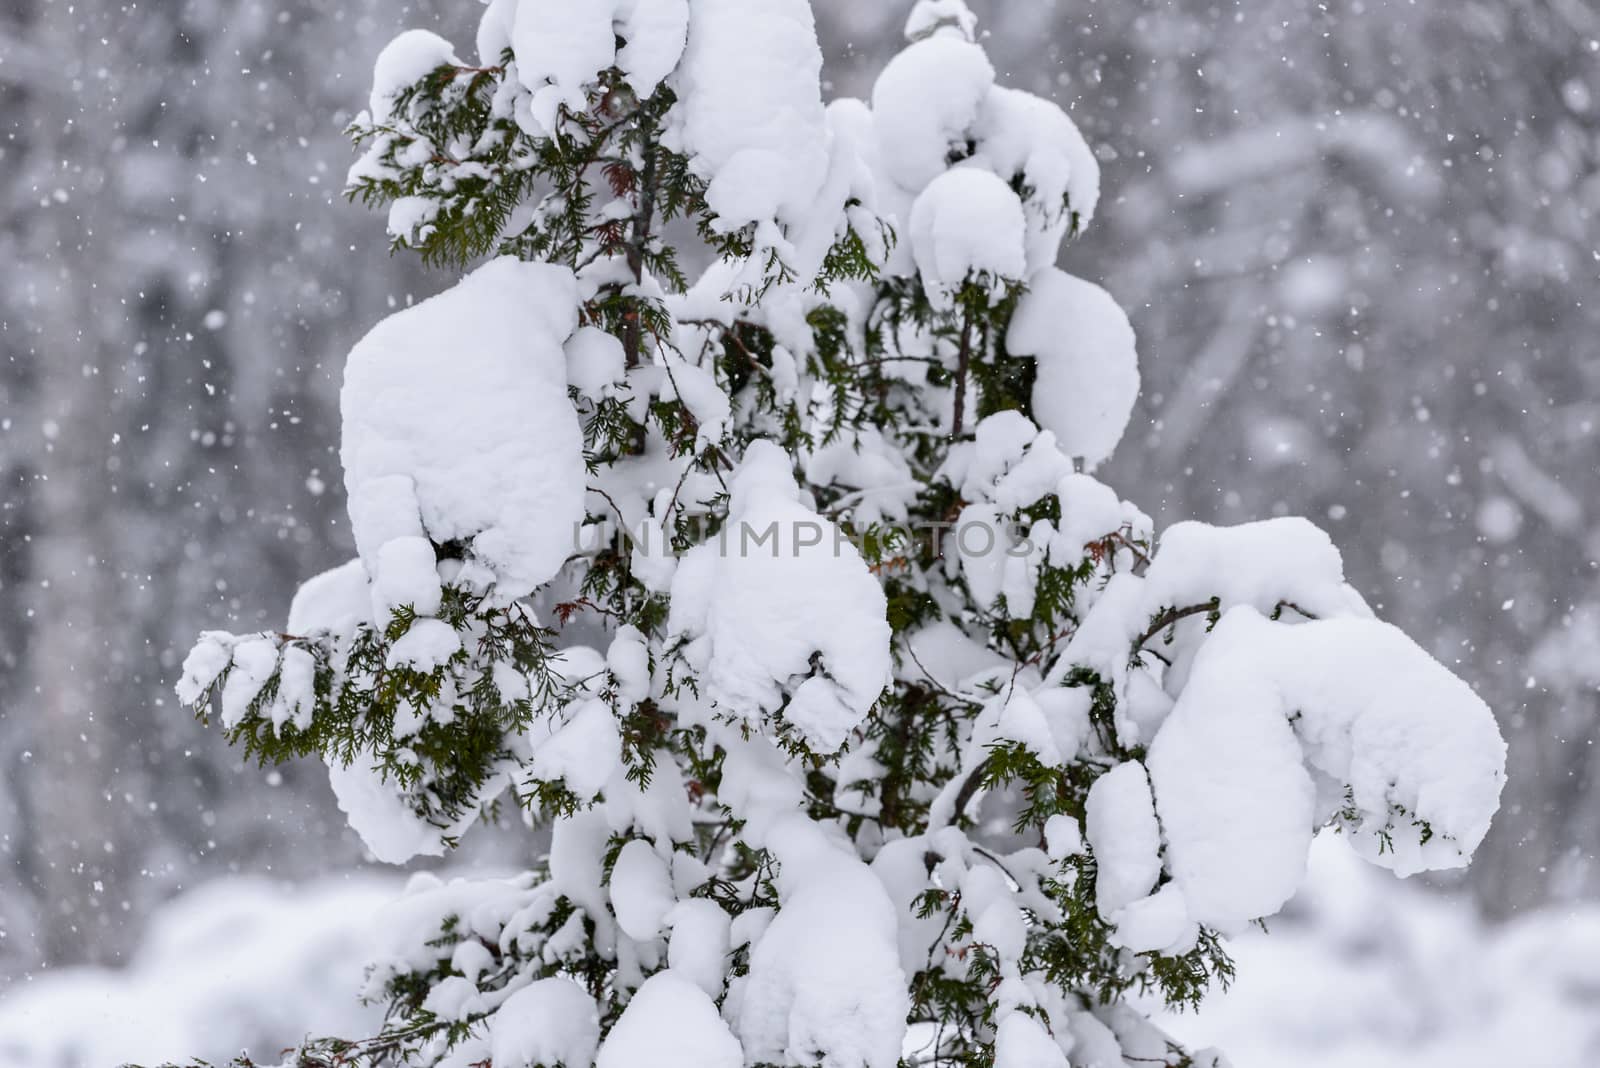 The tree has covered with heavy snow in winter season at Lapland by animagesdesign